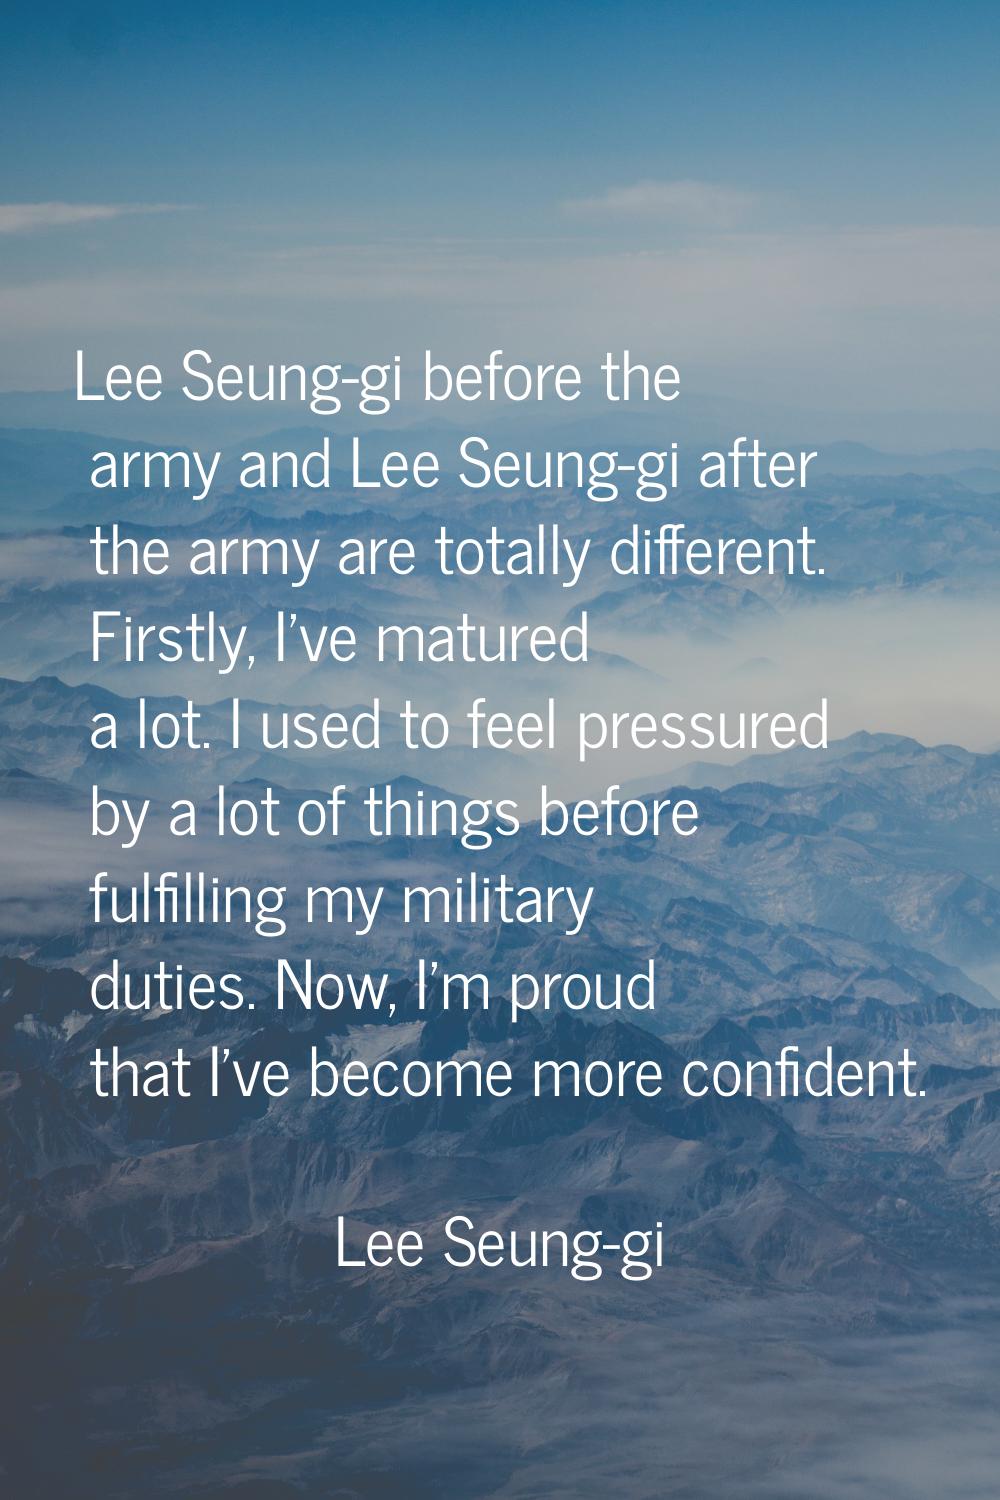 Lee Seung-gi before the army and Lee Seung-gi after the army are totally different. Firstly, I've m